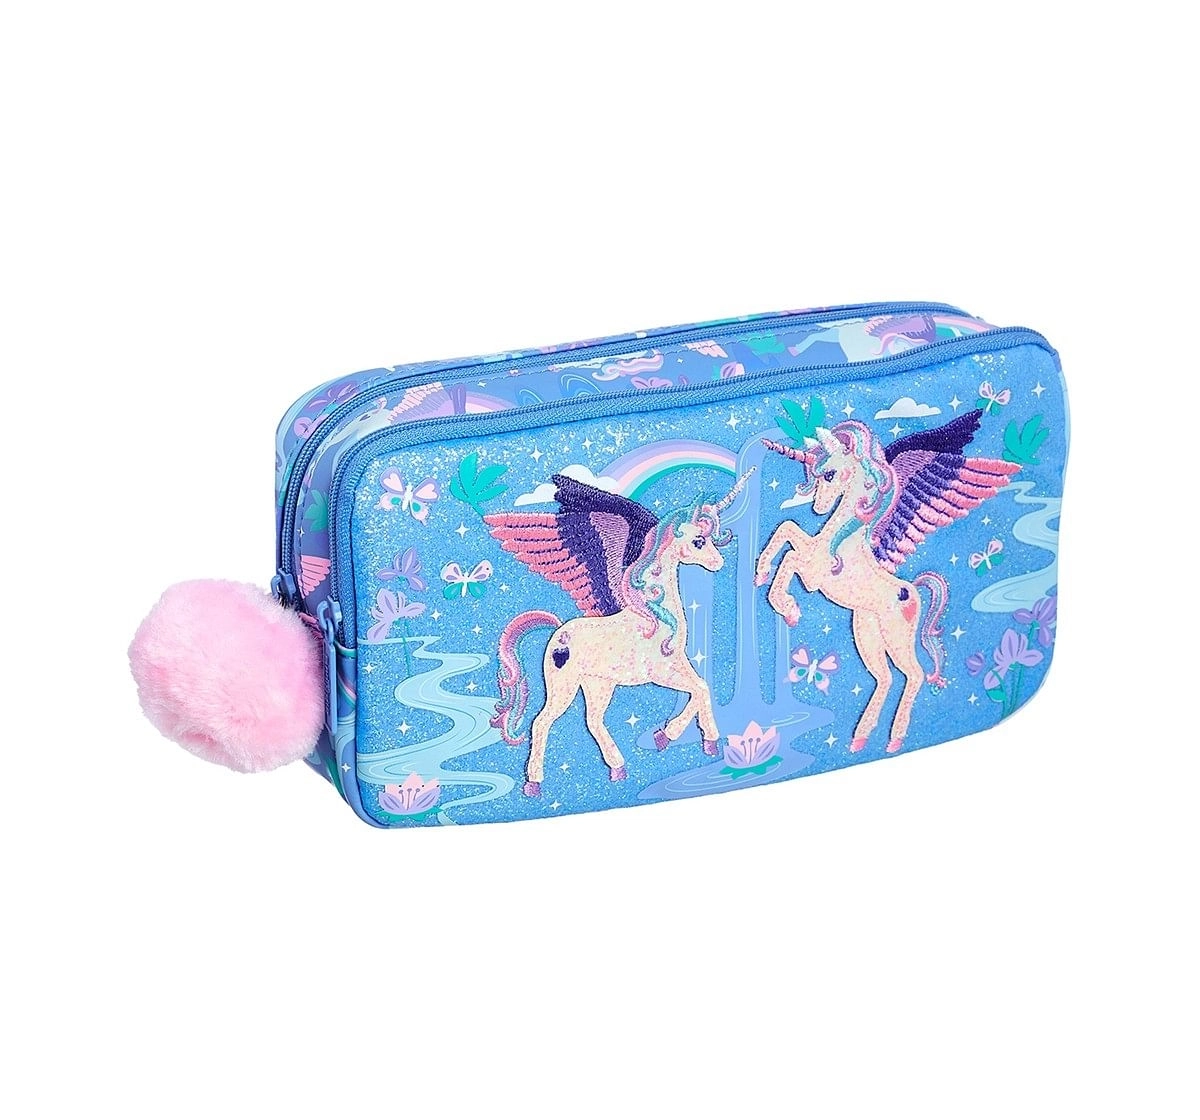 Smiggle Far Away Character Pencil Case - Unicorn Print Bags for Kids age 3Y+ (Cornflower Blue)